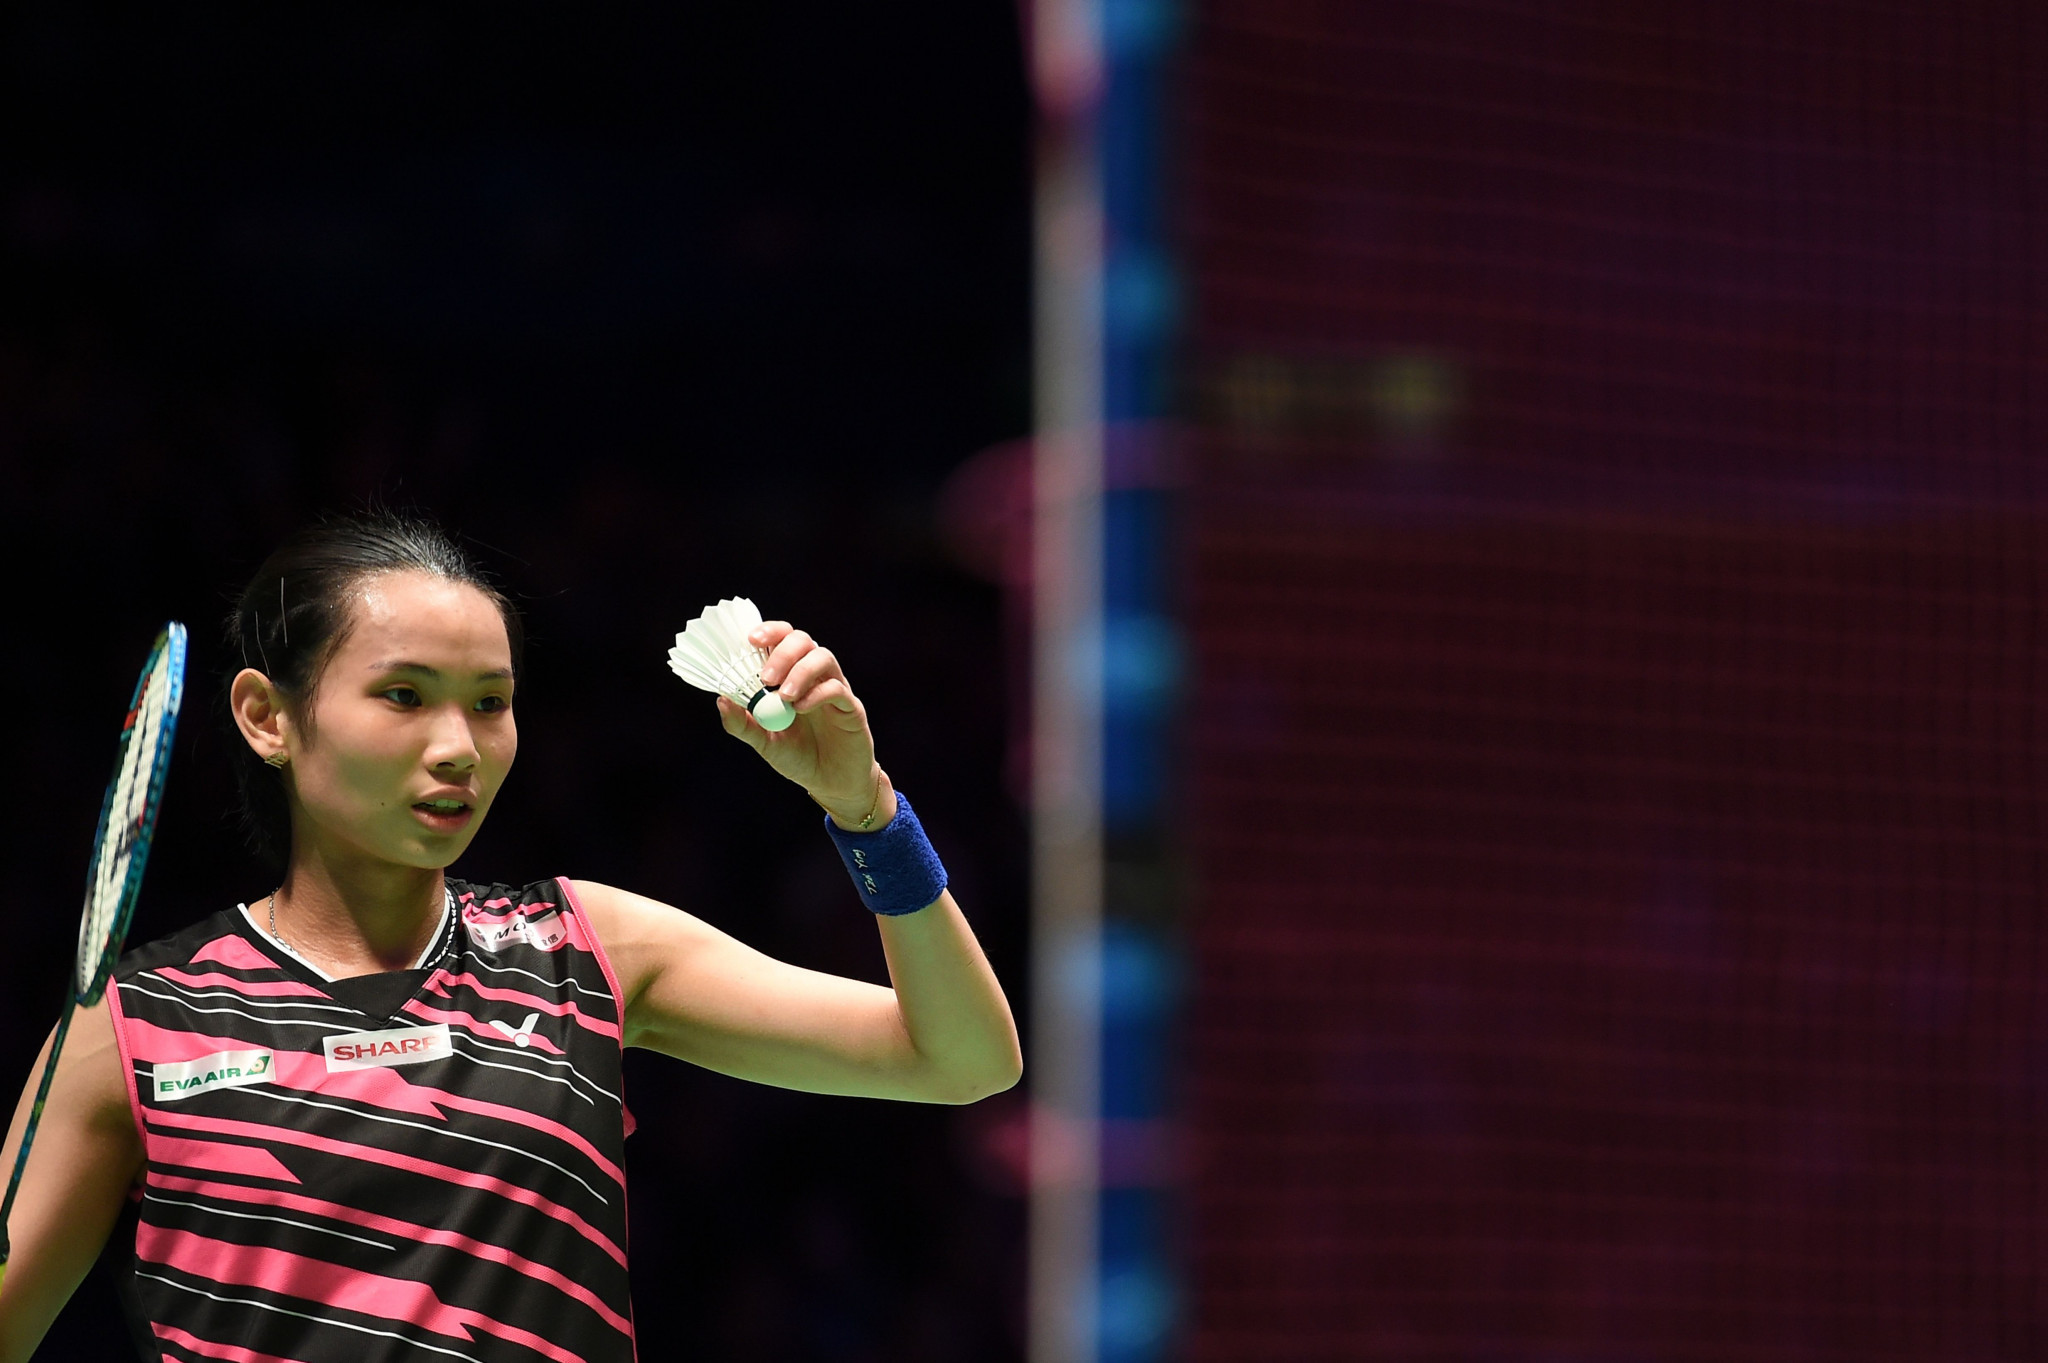 Taiwan's Tai Tzu Ying successfully defended her women's singles title ©Getty Images